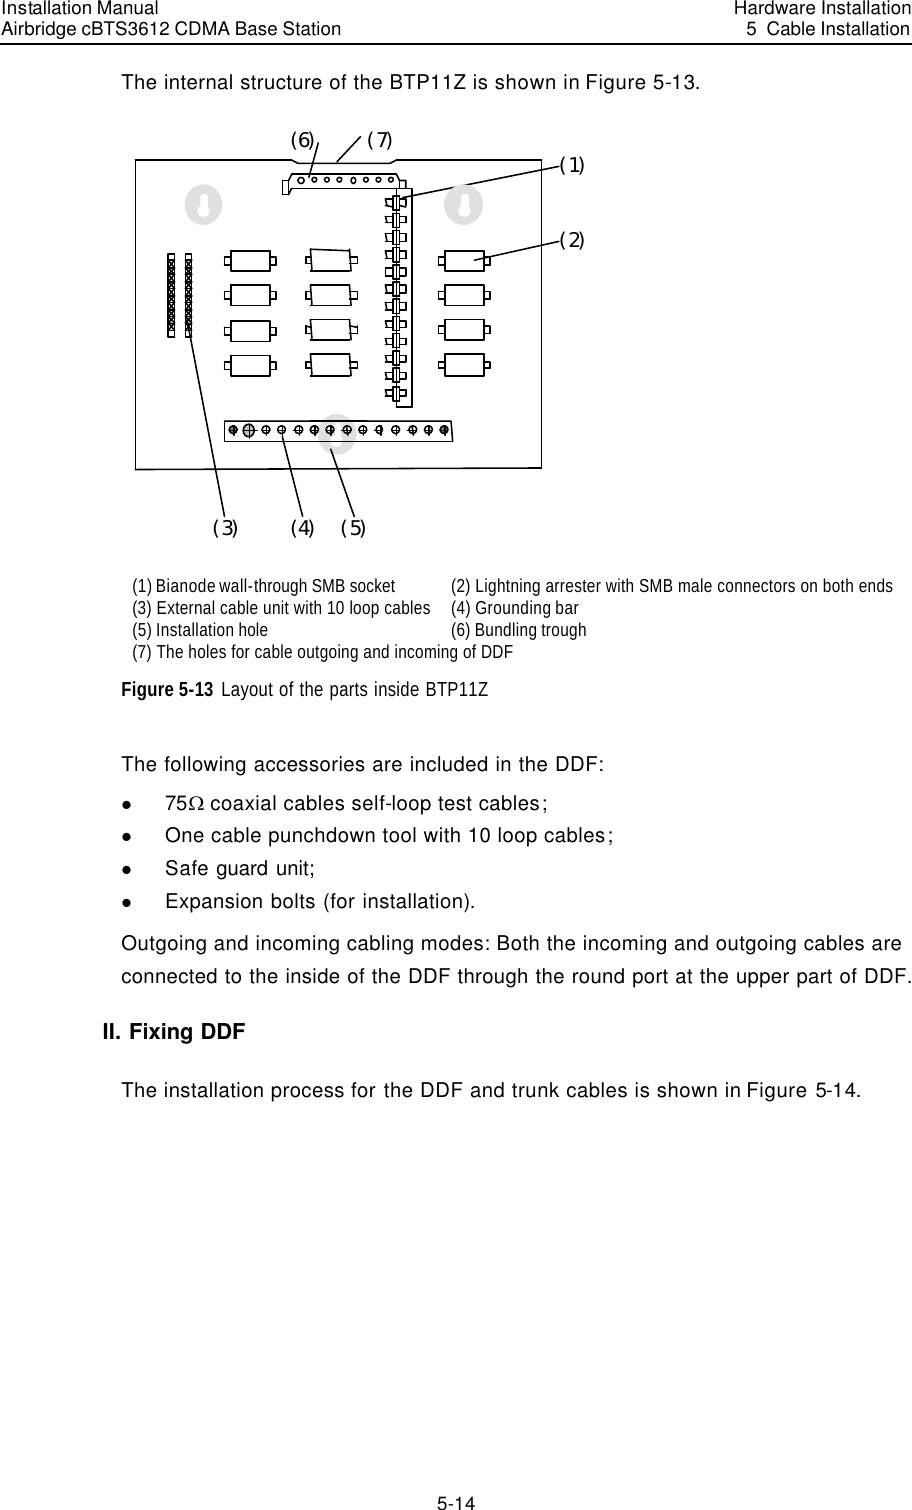 Installation Manual Airbridge cBTS3612 CDMA Base Station Hardware Installation5  Cable Installation 5-14　The internal structure of the BTP11Z is shown in Figure 5-13.  （１）（２）（３） （４） （５）（７）（６） (1) Bianode wall-through SMB socket  (2) Lightning arrester with SMB male connectors on both ends   (3) External cable unit with 10 loop cables (4) Grounding bar (5) Installation hole (6) Bundling trough (7) The holes for cable outgoing and incoming of DDF  Figure 5-13 Layout of the parts inside BTP11Z The following accessories are included in the DDF: l 75W coaxial cables self-loop test cables; l One cable punchdown tool with 10 loop cables; l Safe guard unit; l Expansion bolts (for installation). Outgoing and incoming cabling modes: Both the incoming and outgoing cables are connected to the inside of the DDF through the round port at the upper part of DDF.  II. Fixing DDF  The installation process for the DDF and trunk cables is shown in Figure 5-14. 